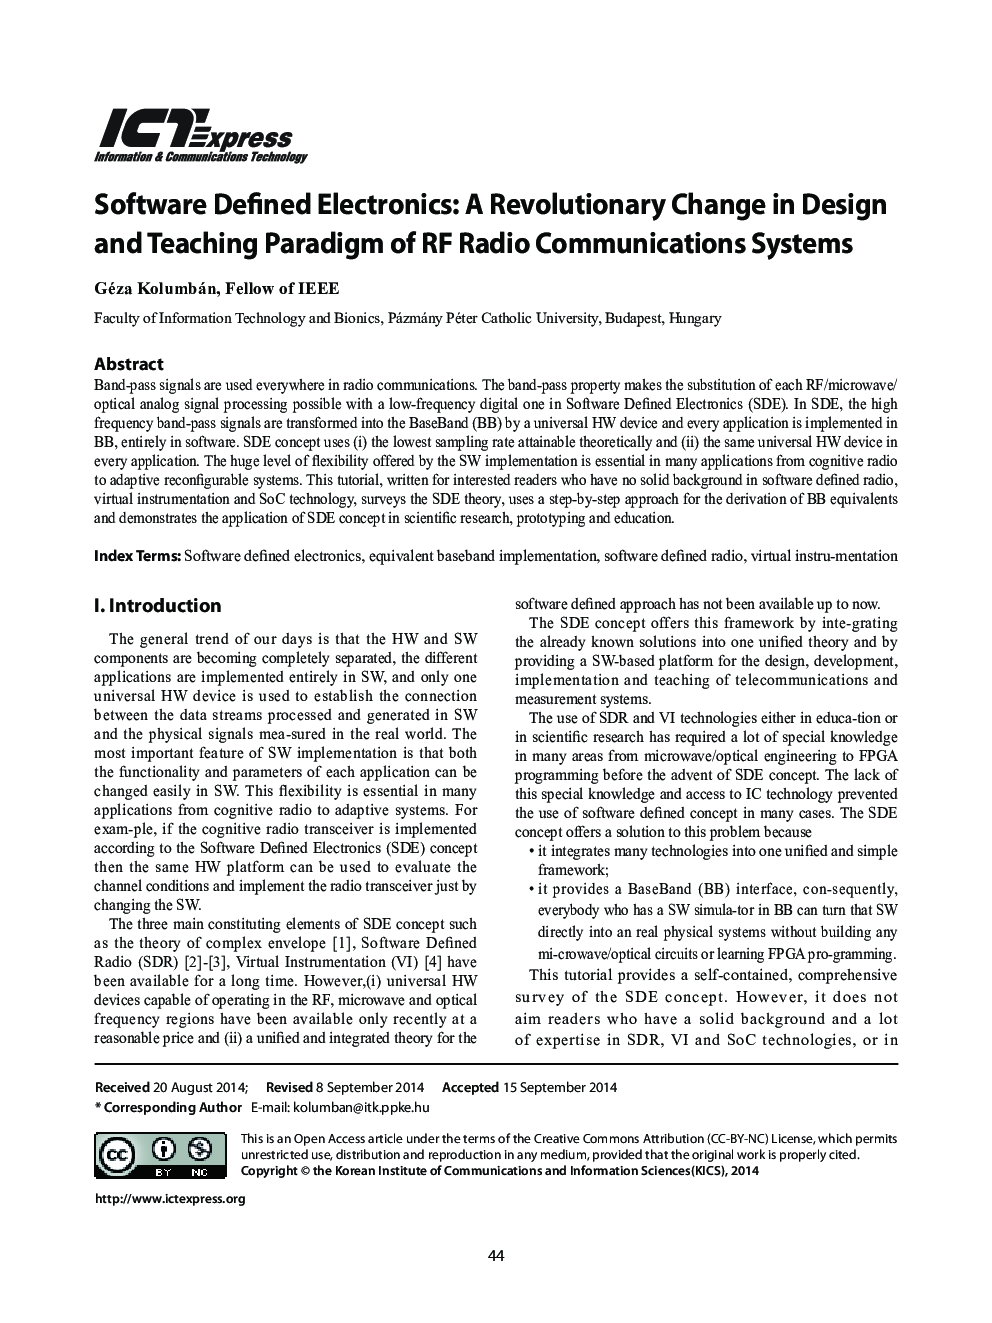 Software Defined Electronics: A Revolutionary Change in Design and Teaching Paradigm of RF Radio Communications Systems 